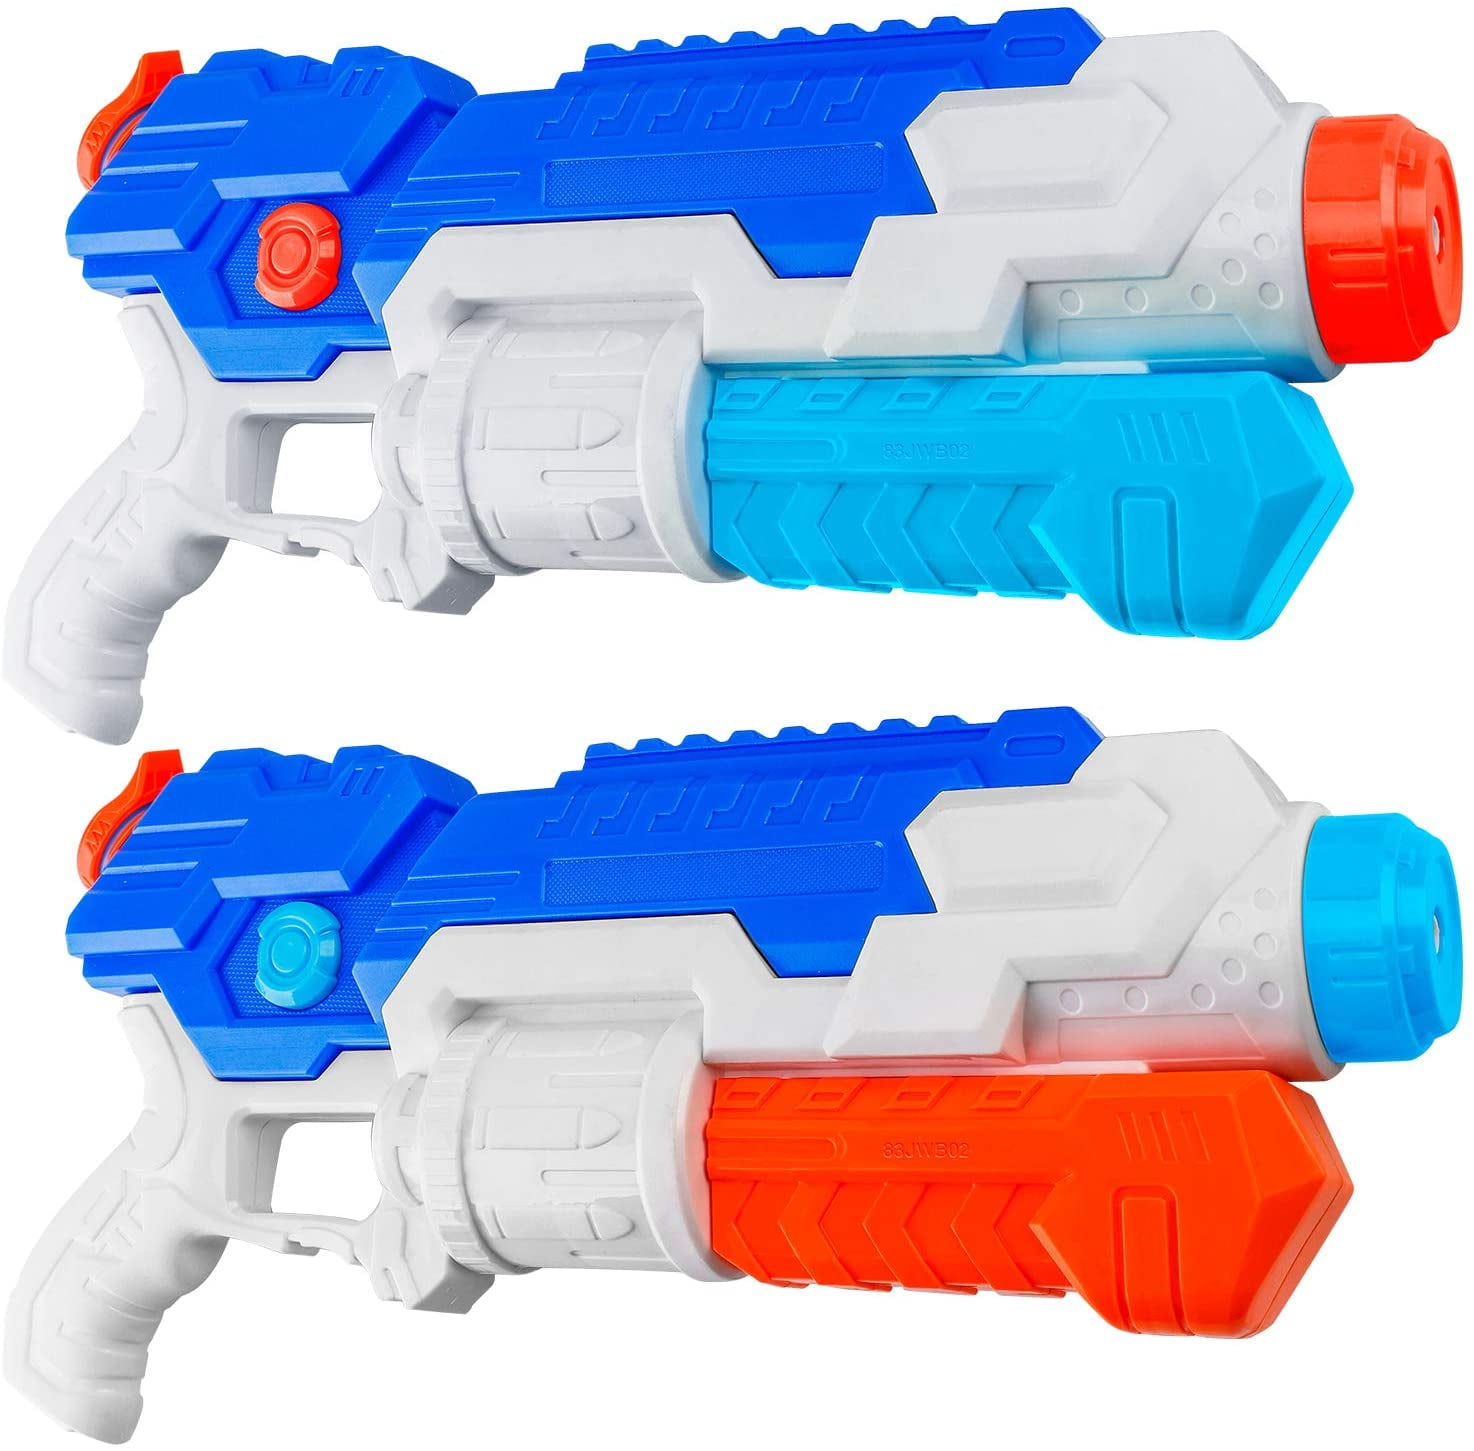 Details about  / US Backpack Water Gun Kids Outdoor Toys Super Soaker Squirt Gun Beach Toy C NEW